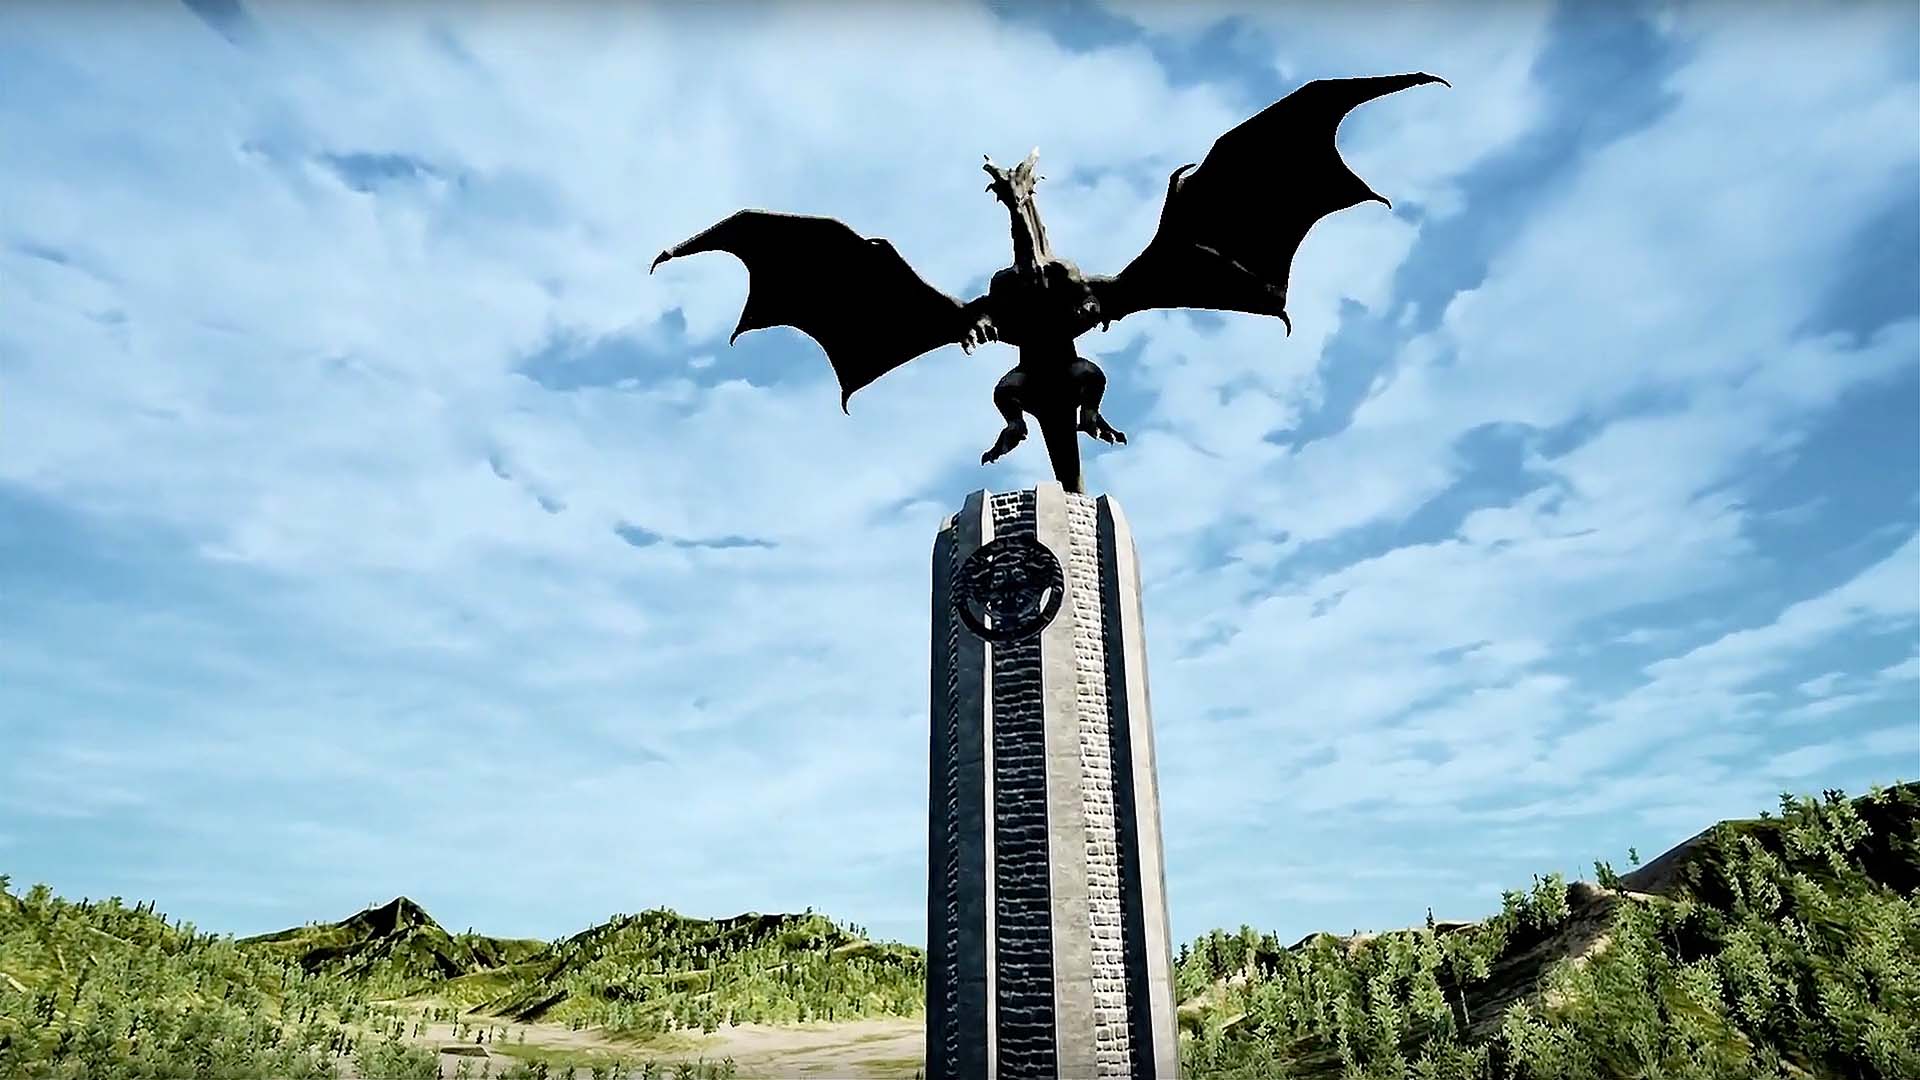 Screen capture of a dragon on a tower in a SDM student production